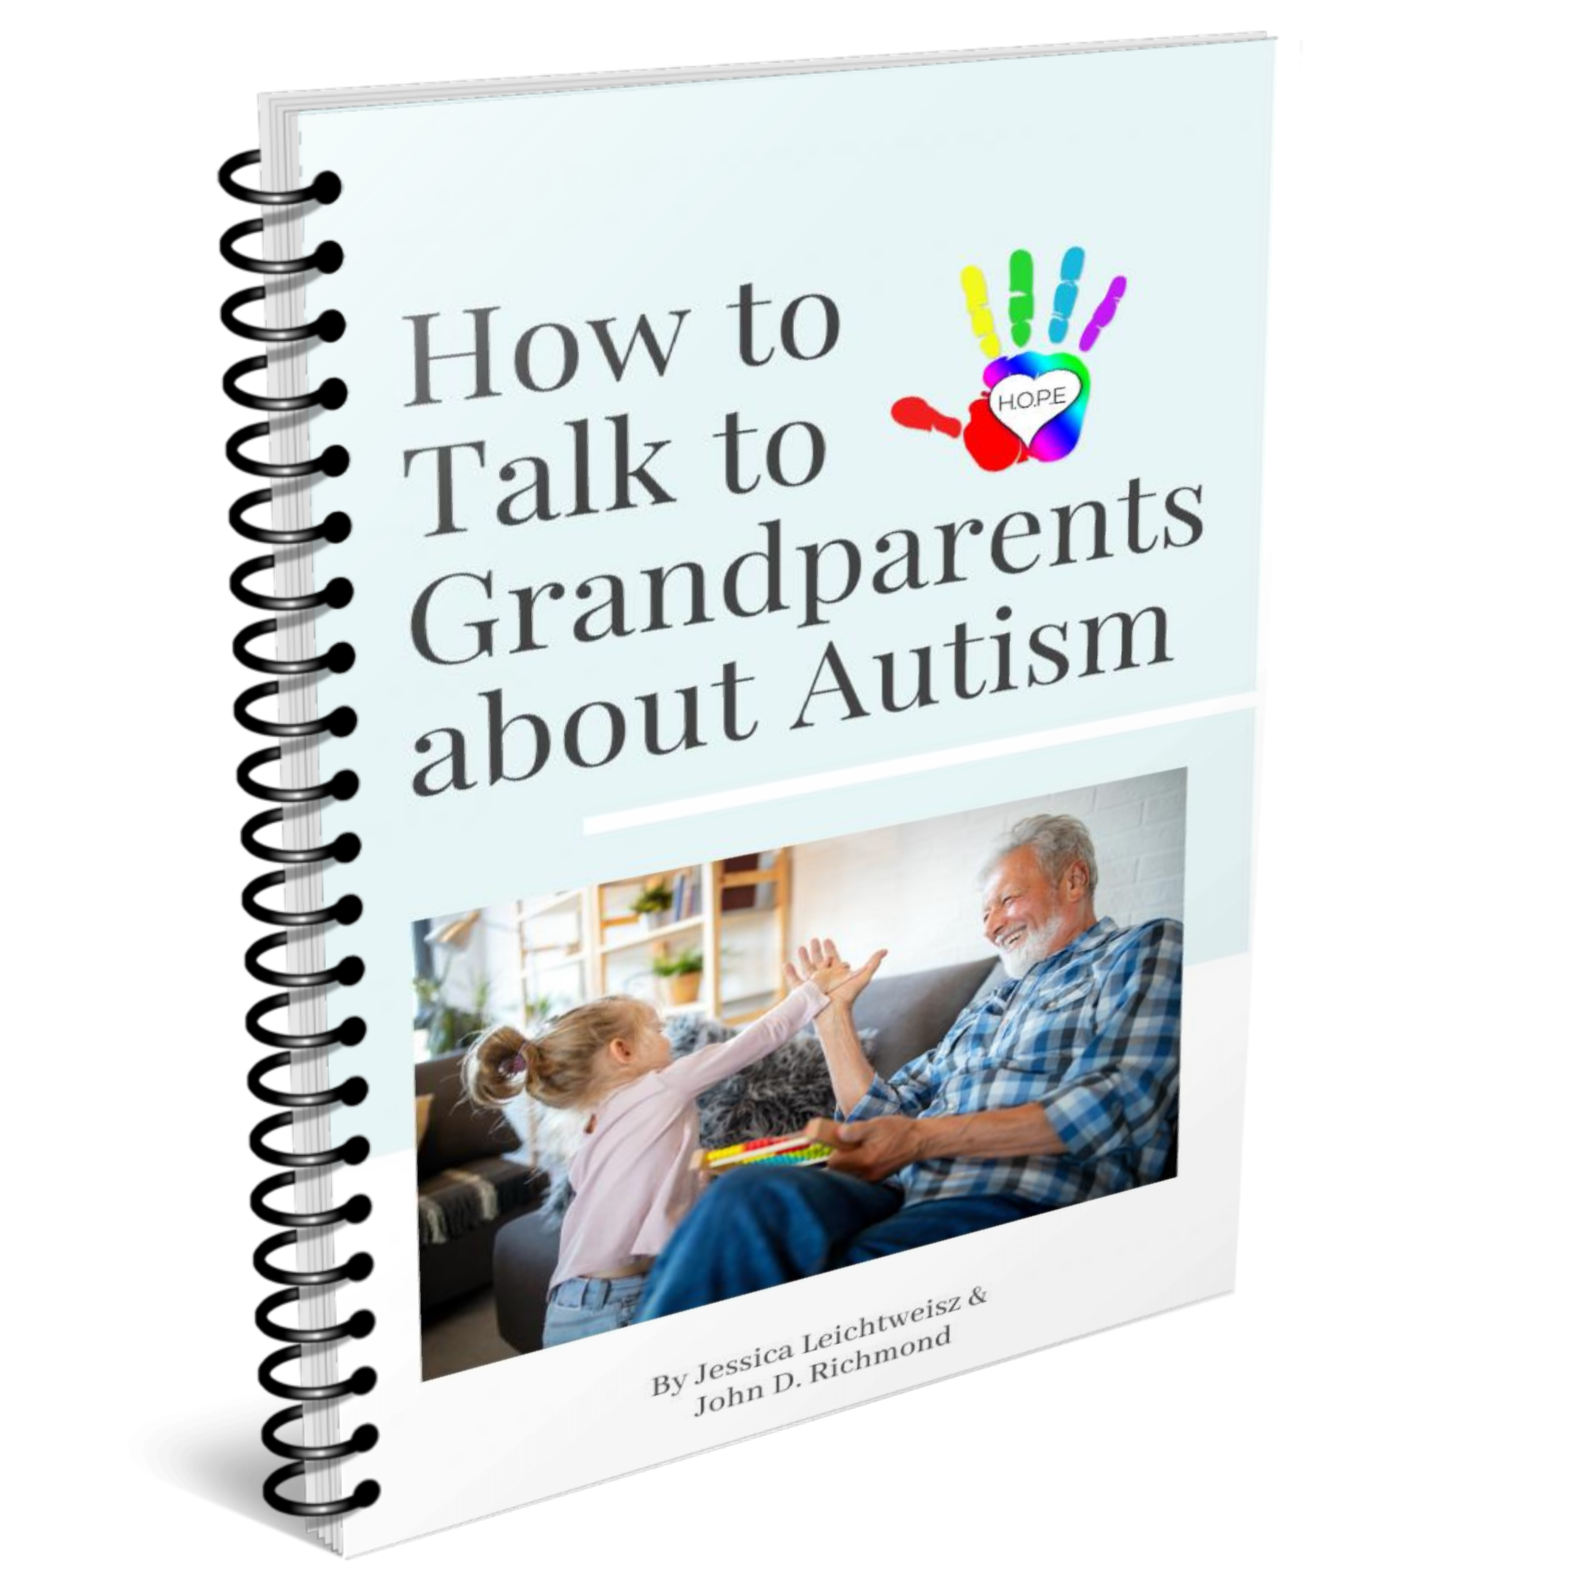 How to Talk to Grandparents About Autism